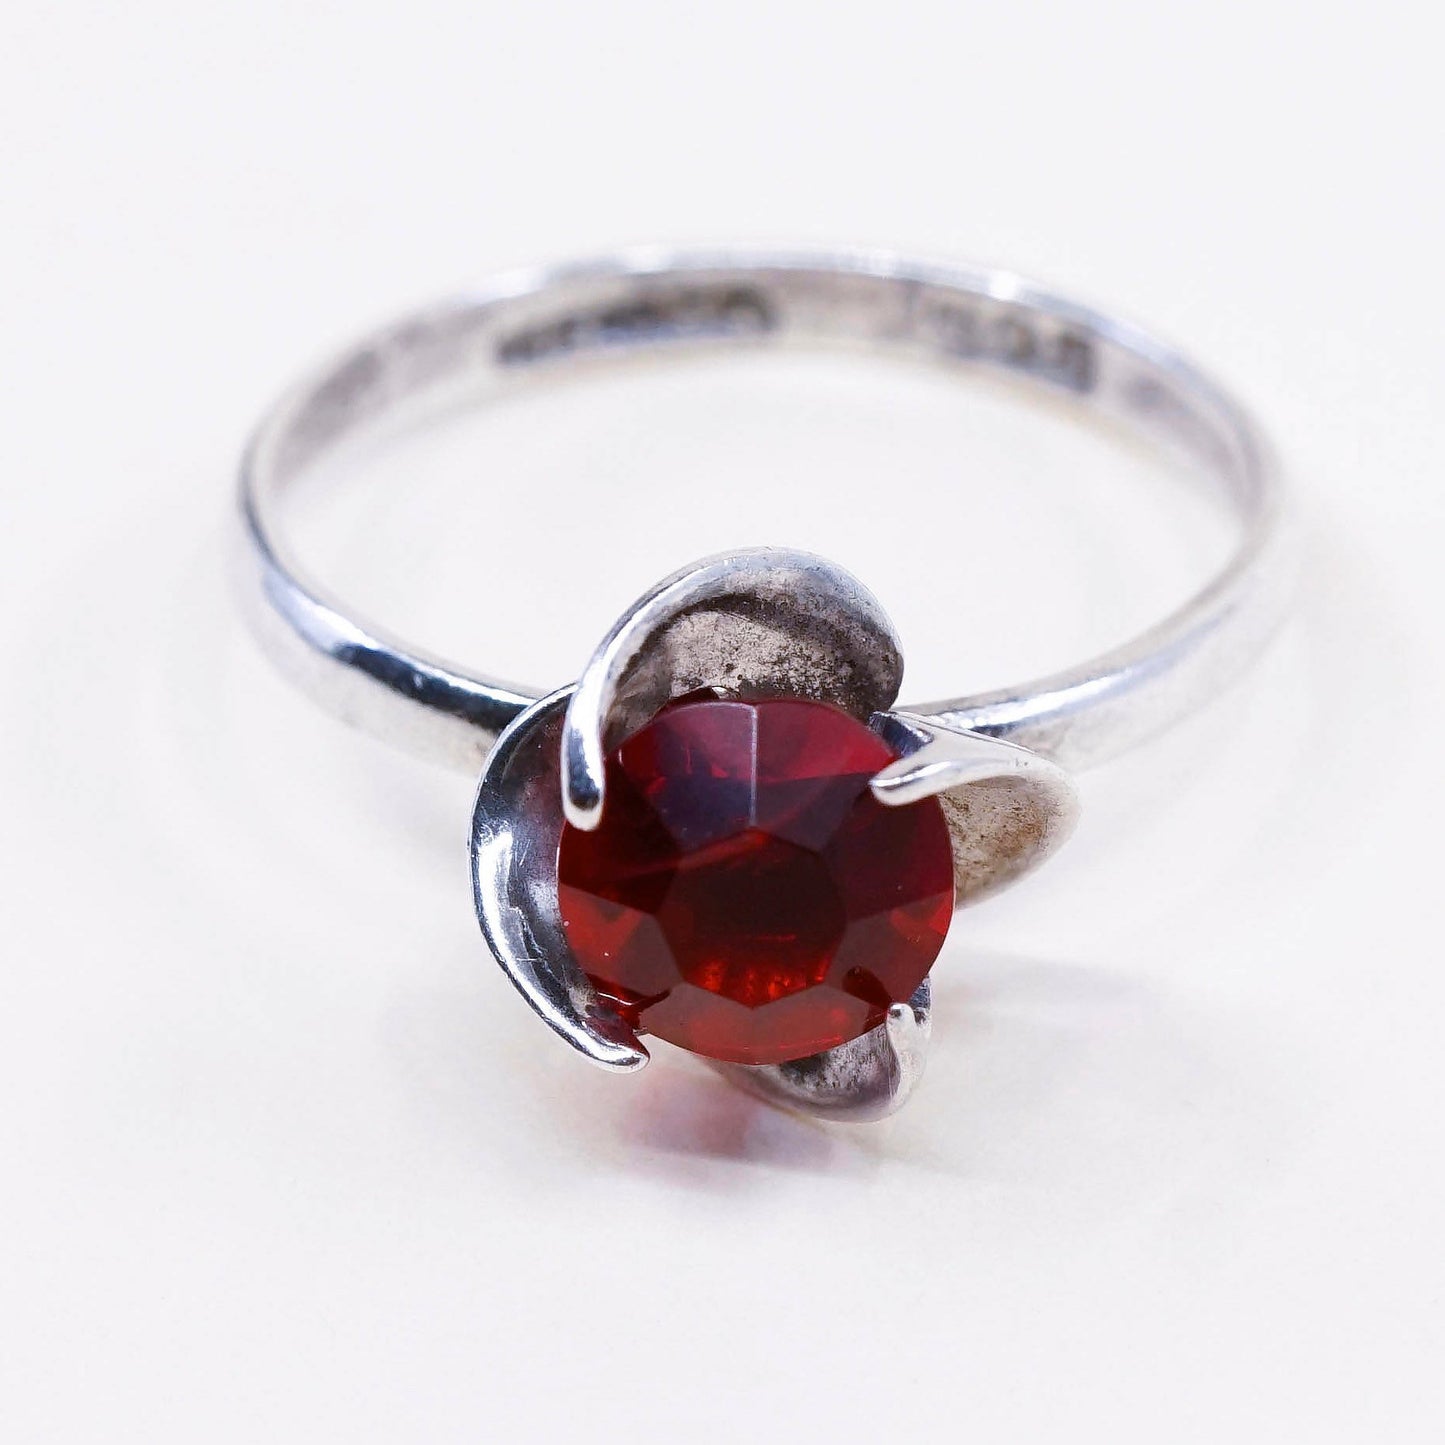 Size 8.5, Vintage Mexico sterling 925 silver handmade crown ring with ruby